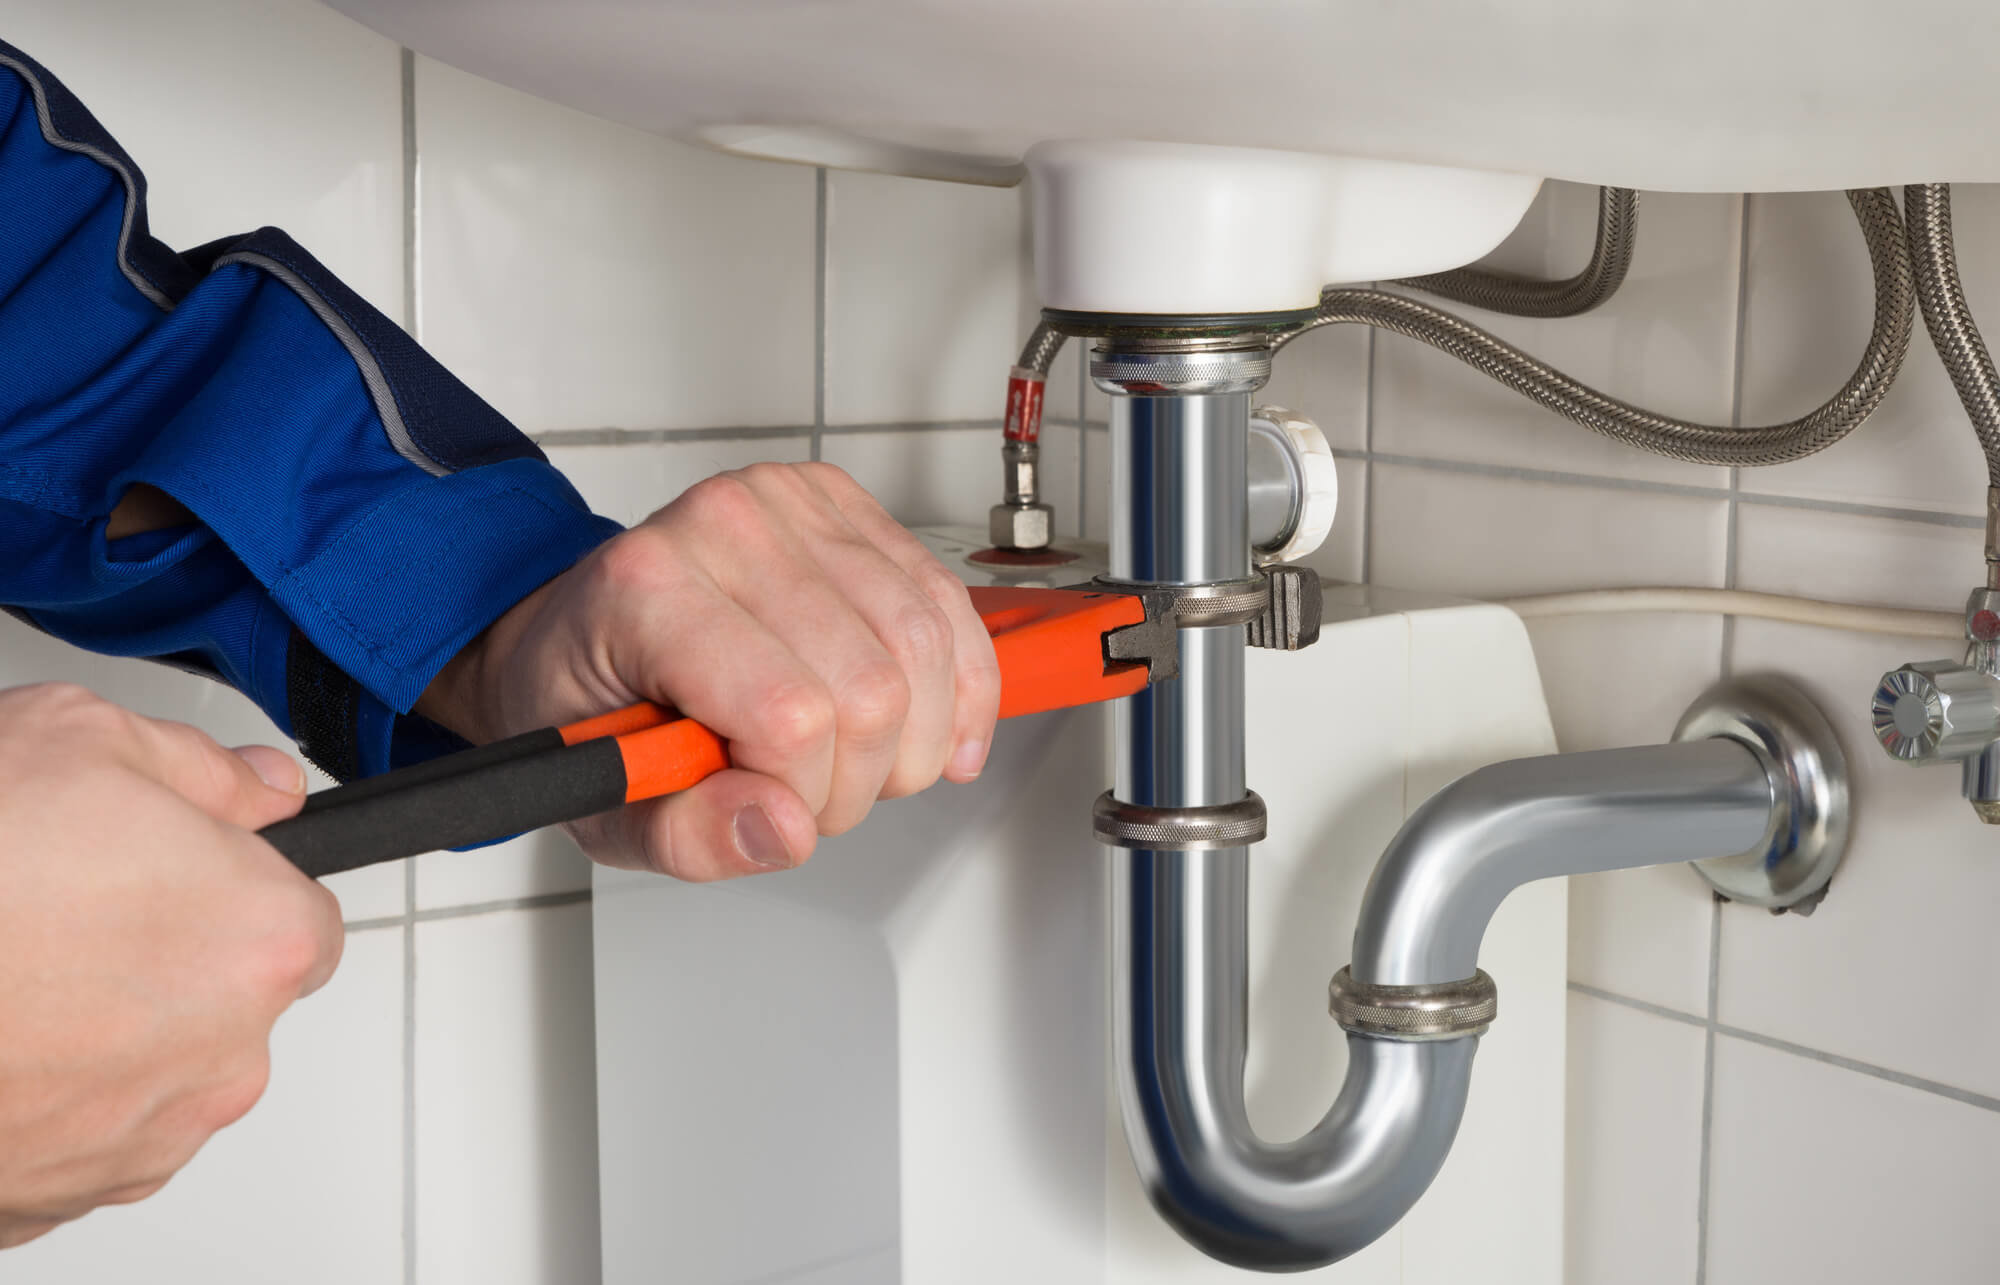 We Got Your Back For Every Sanitary Problem With Our Amazing Plumbing Team